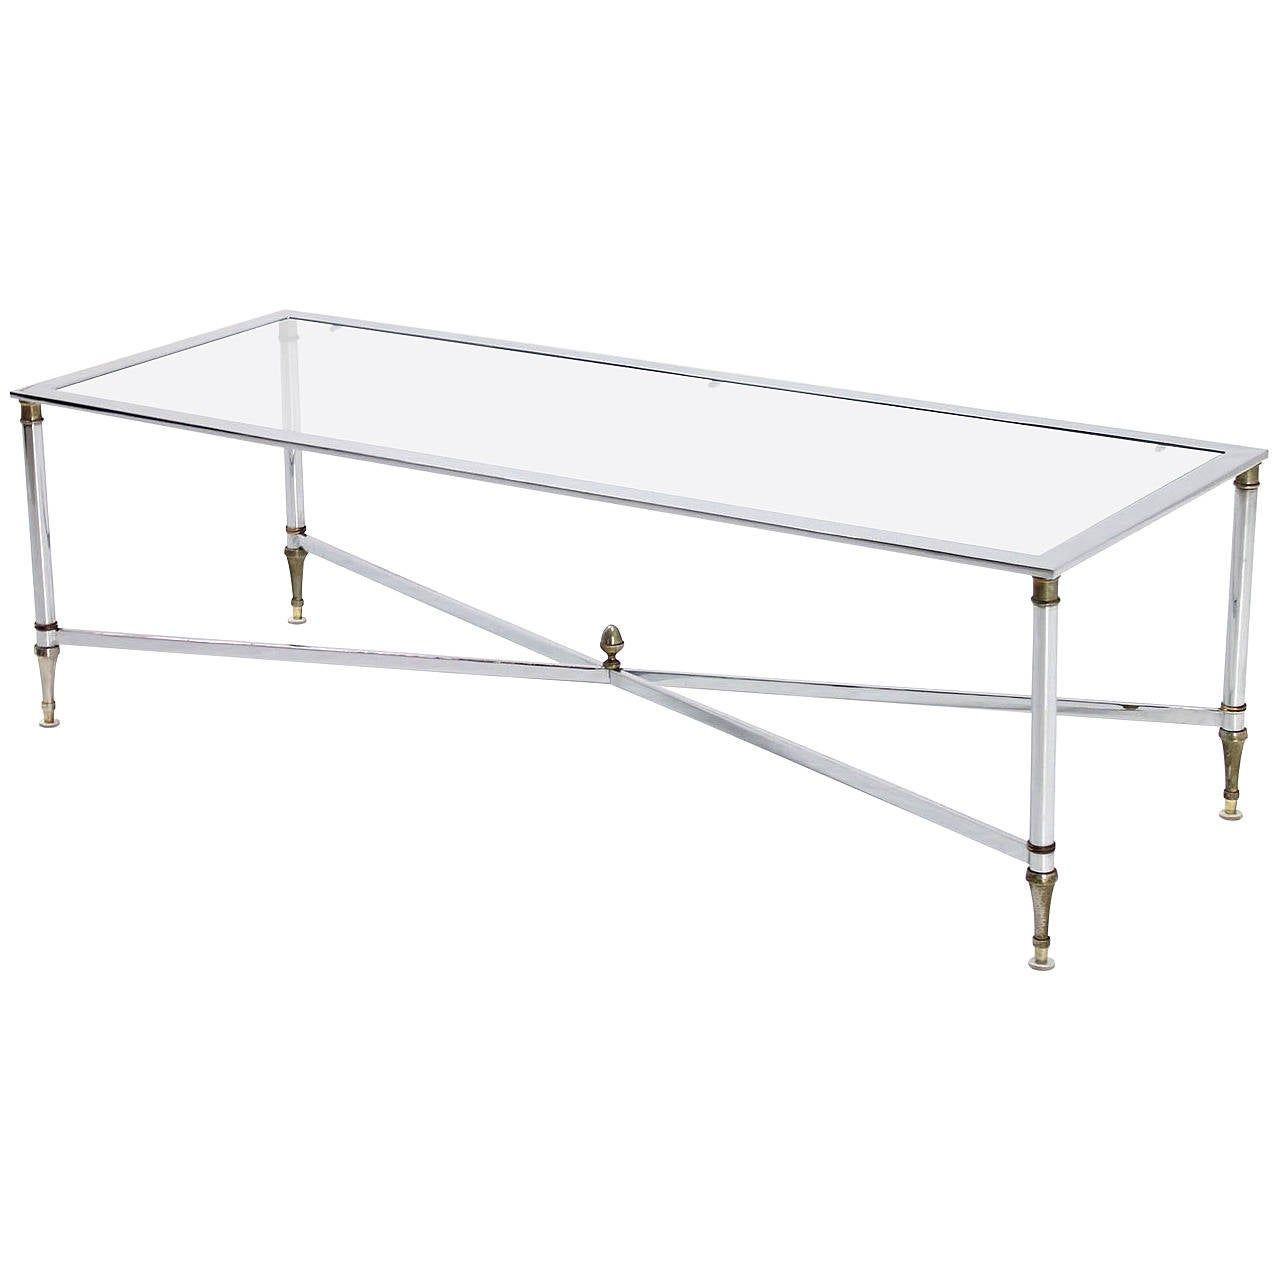 Chrome Brass X Base Glass Top Long Rectangle Coffee Table Pertaining To Newest Chrome And Glass Rectangular Coffee Tables (Gallery 19 of 20)